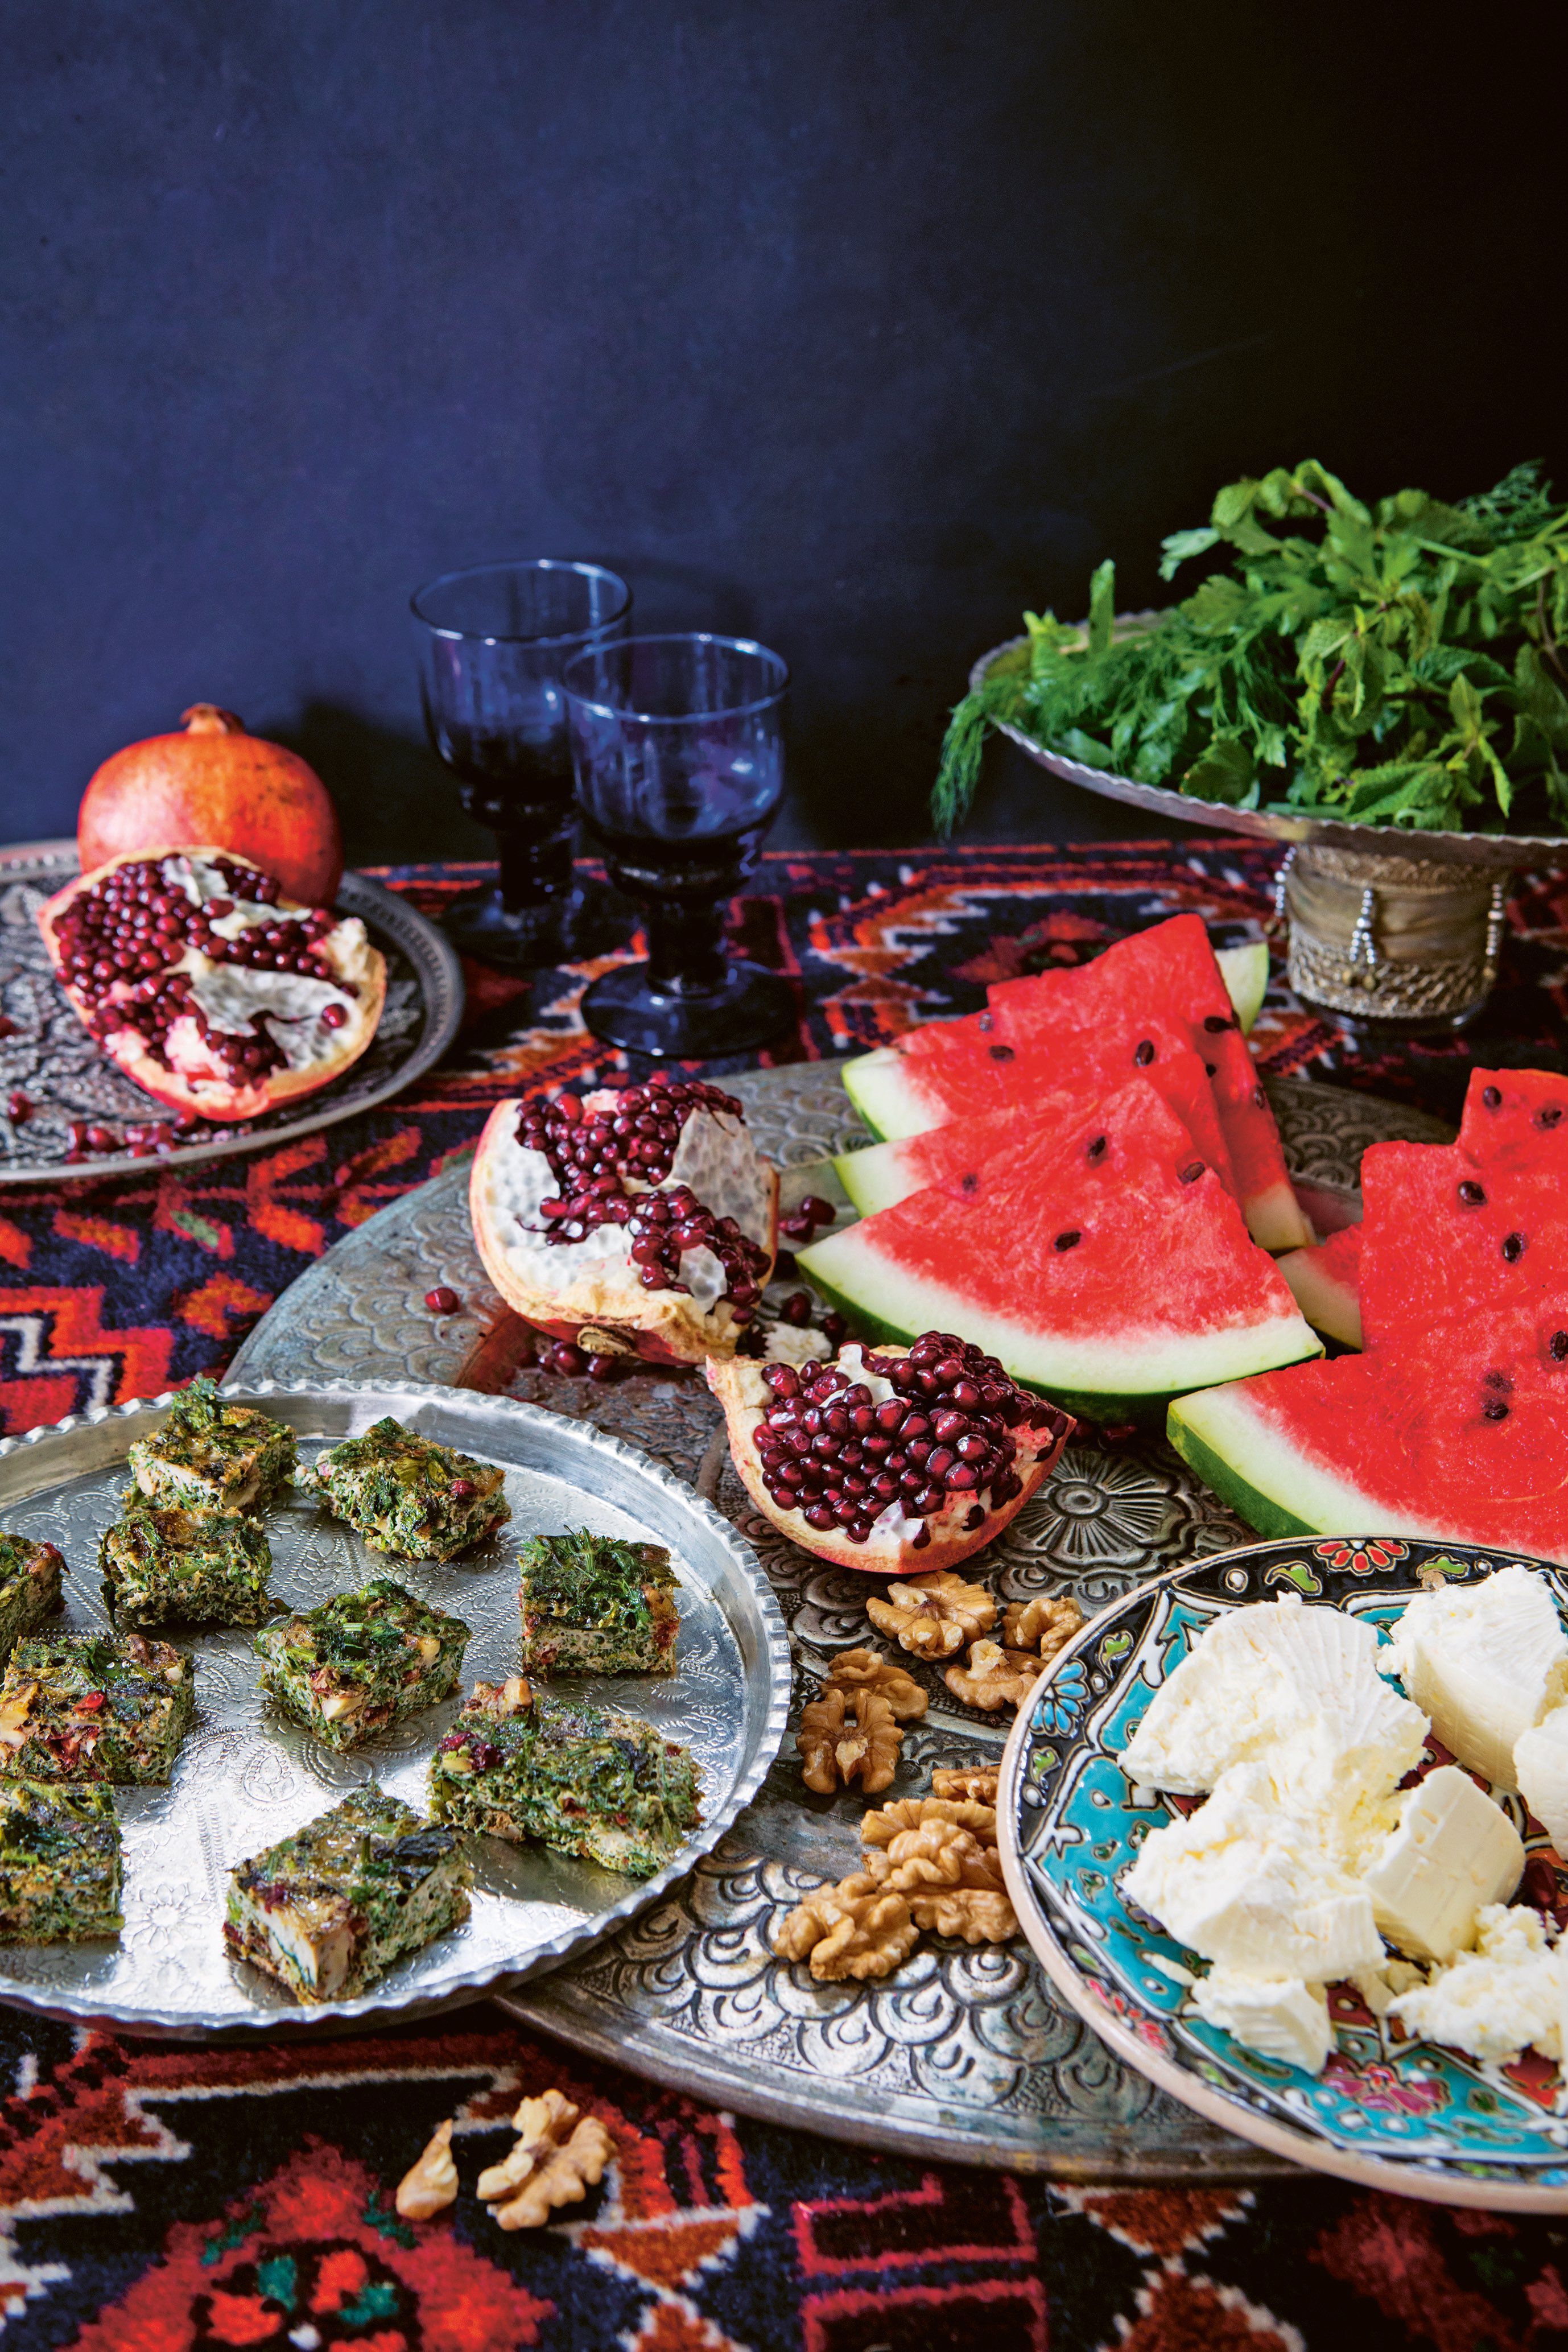 Step into the Persian kitchen with these 3 recipes